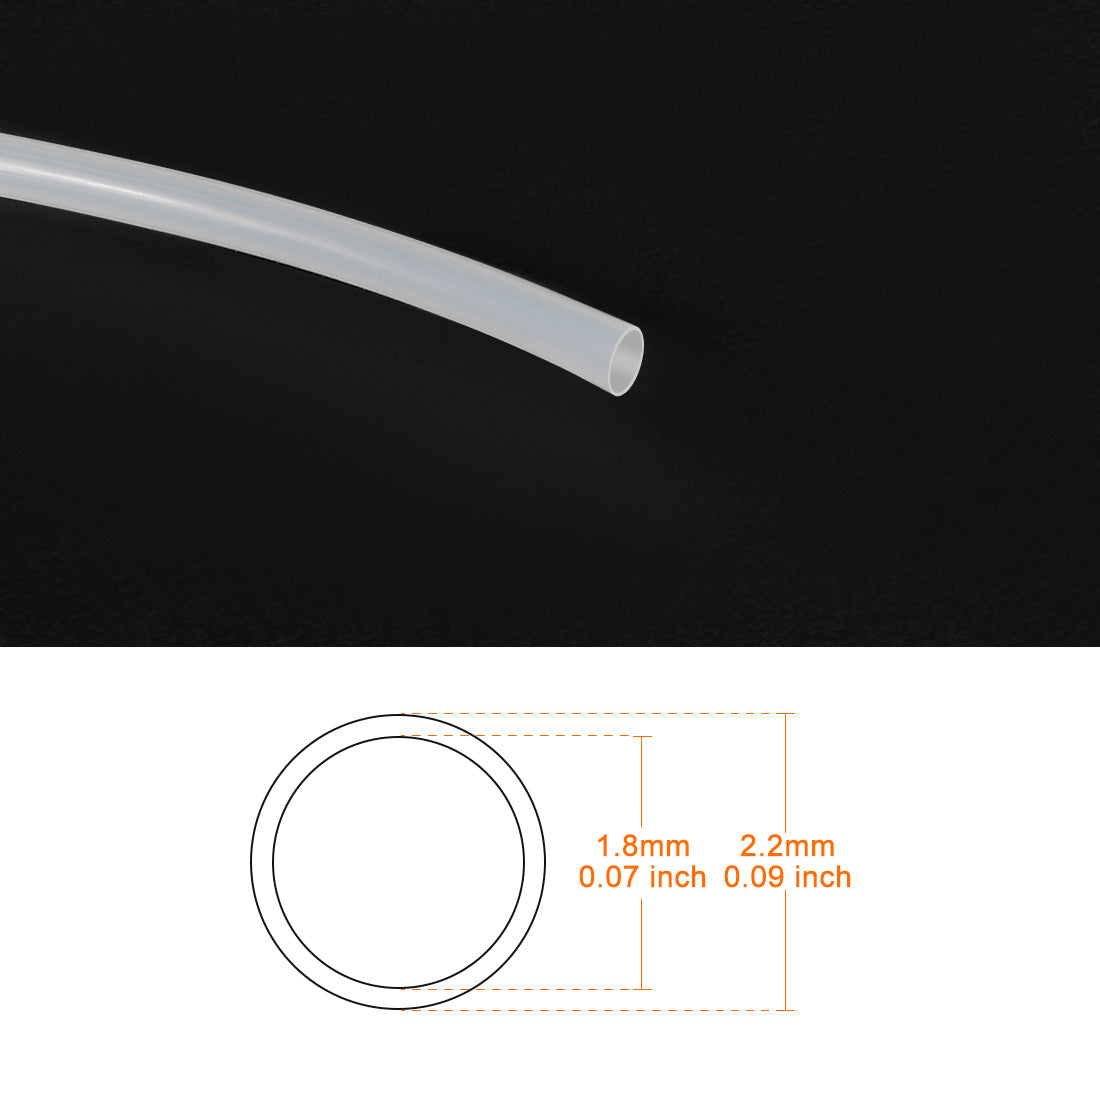 uxcell Uxcell PTFE Tube Tubing 2Meter 6.56ft Lengh Pipe 1.8mm ID 2.2mm OD for 3D Printer RepRap